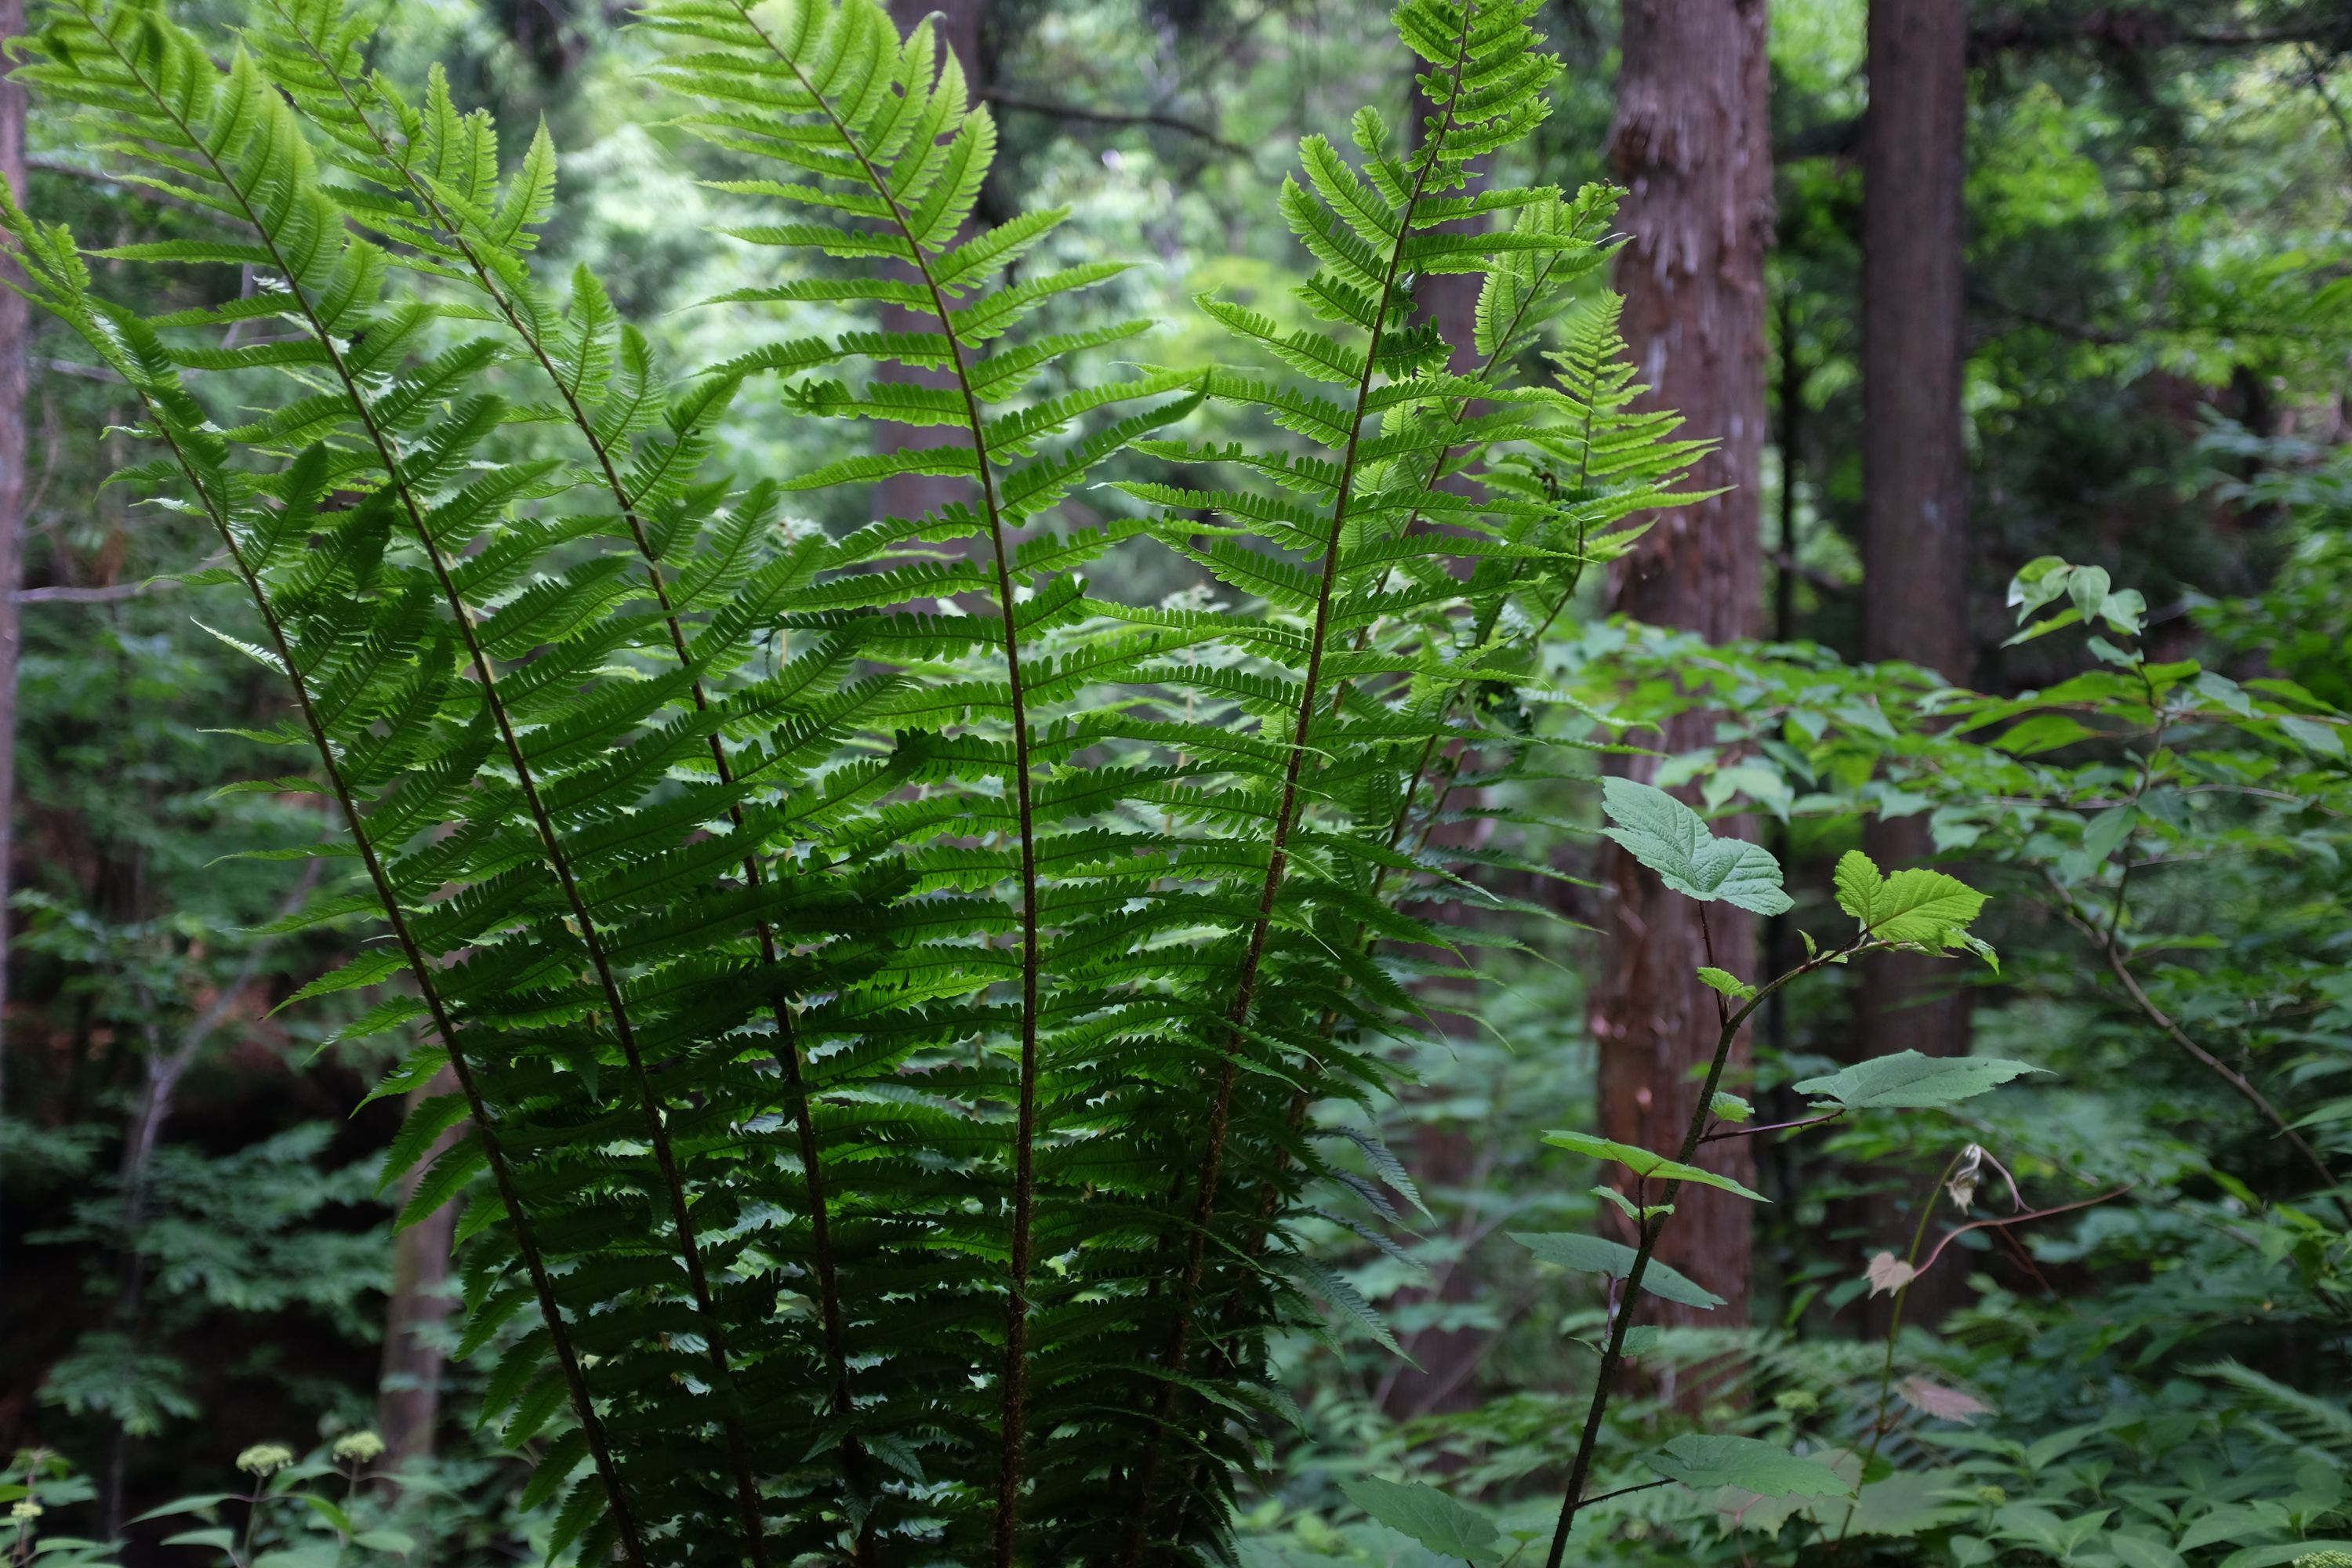 Bracken in the thick undergrowth of a forest.